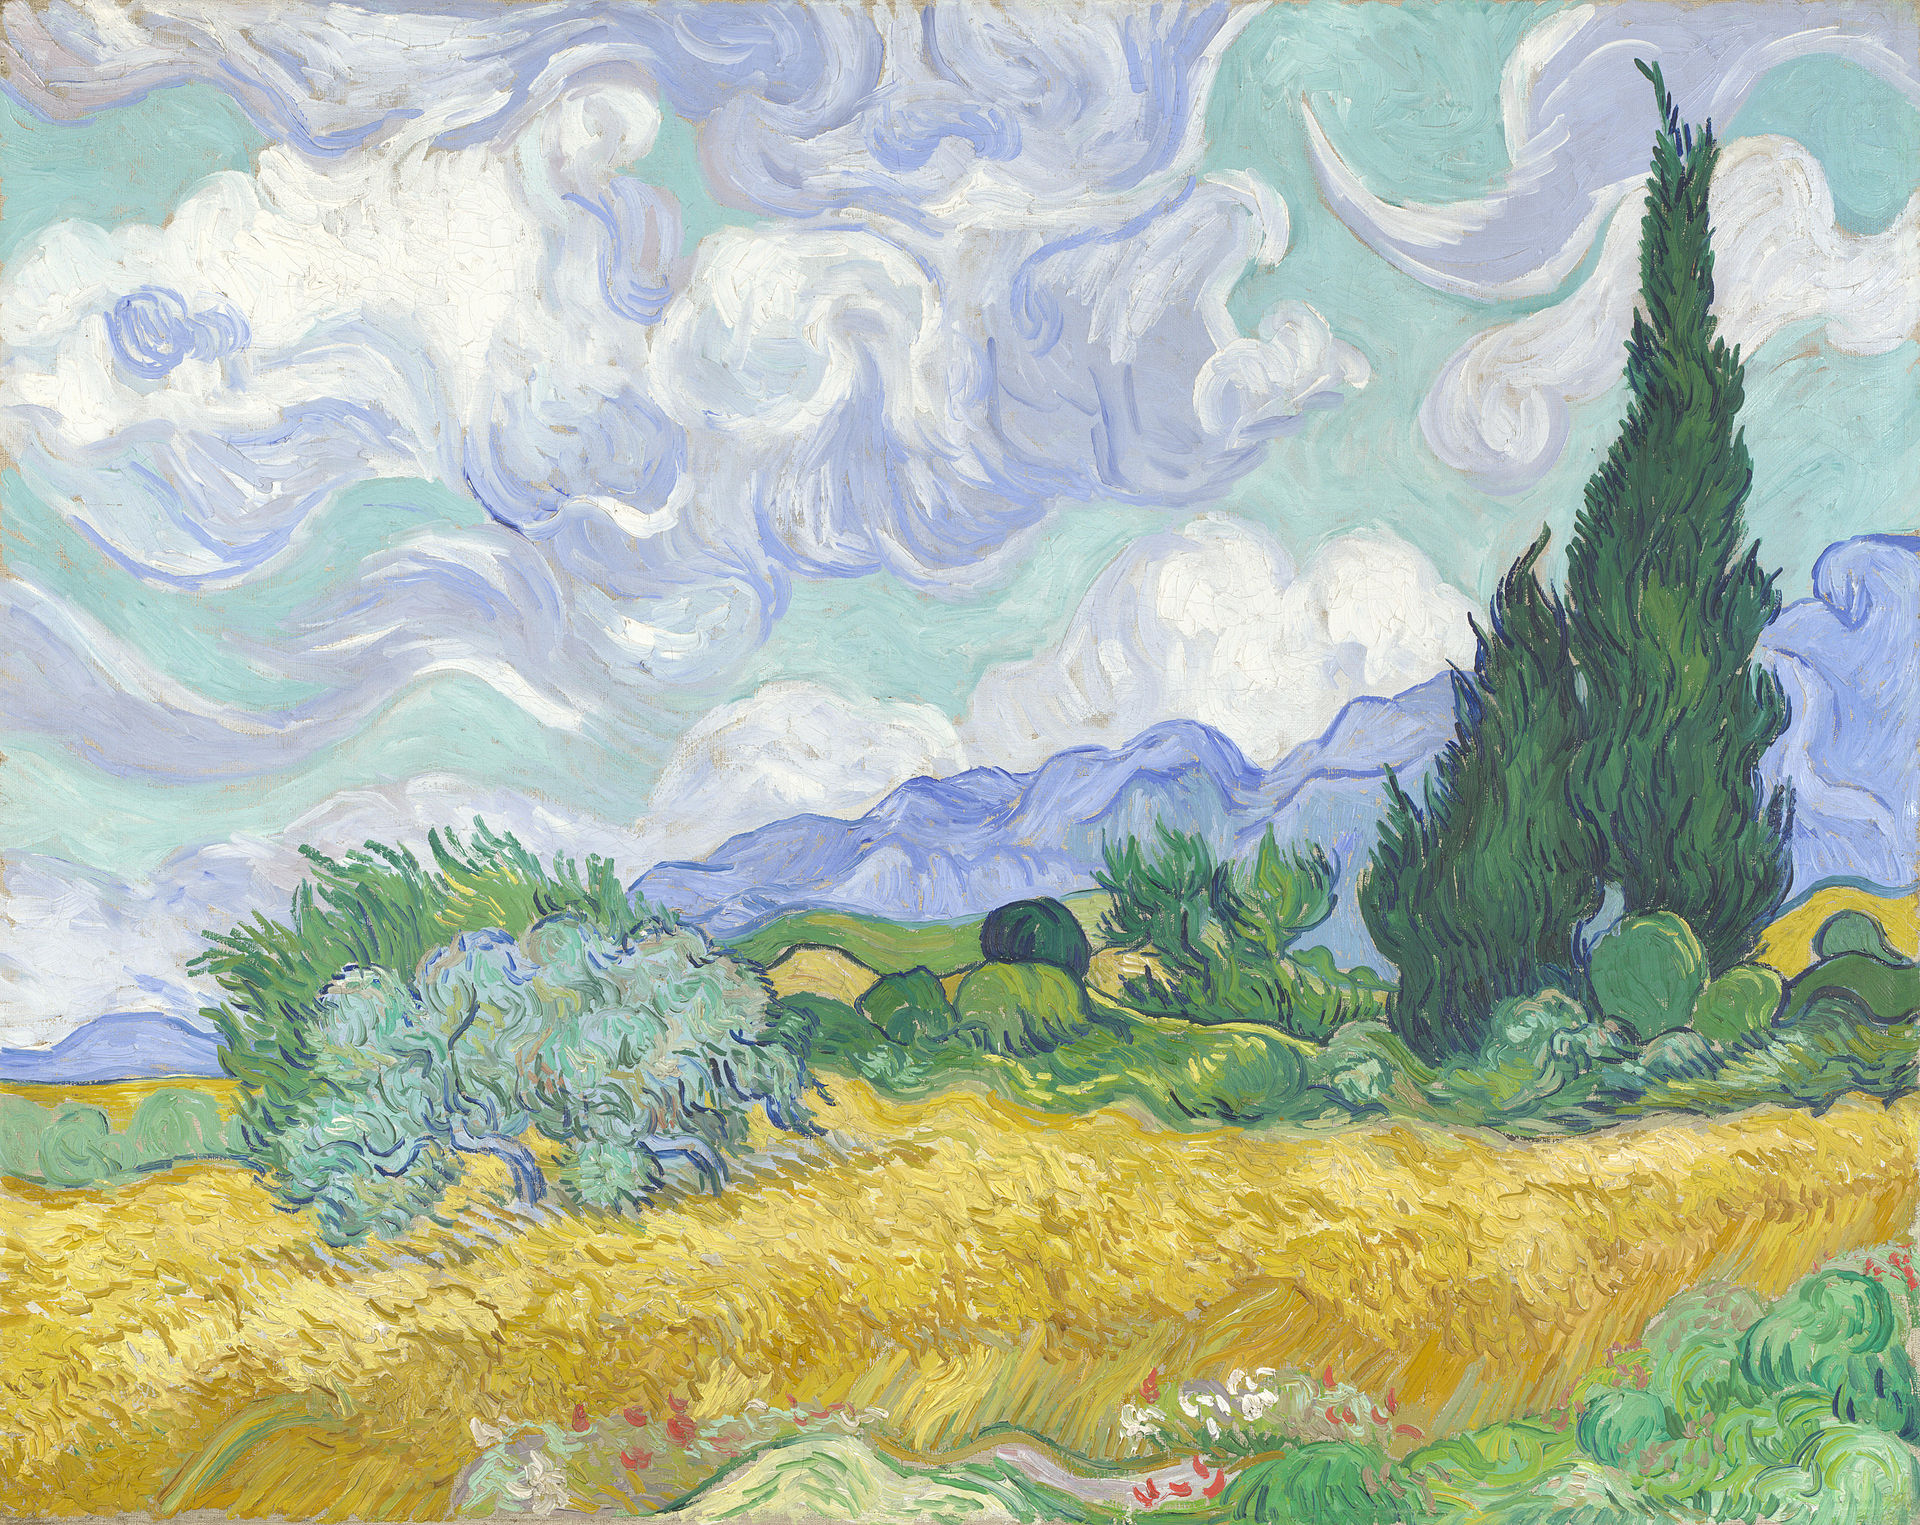 Exhibition: Van Gogh&#8217;s connection to nature